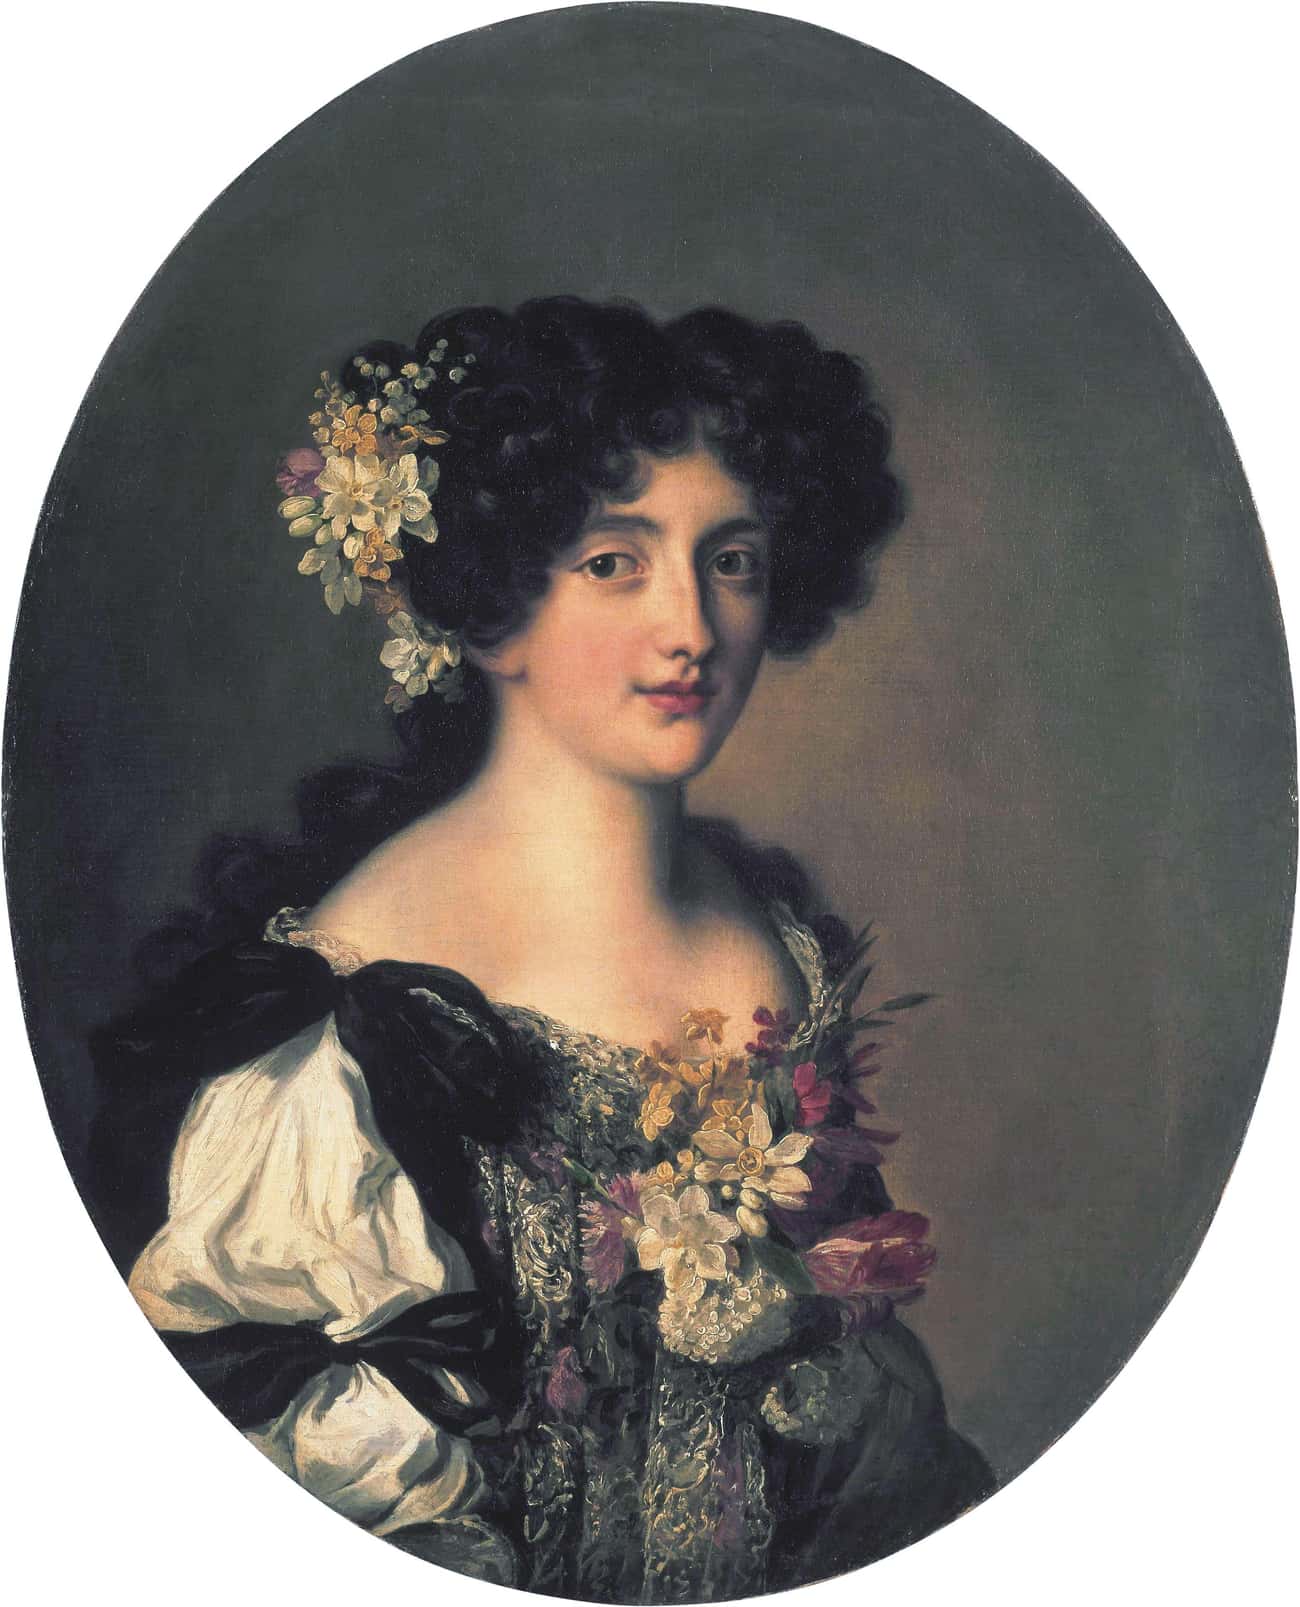 Hortense Mancini May Have Had An Affair With Charles's Illegitimate Daughter Too